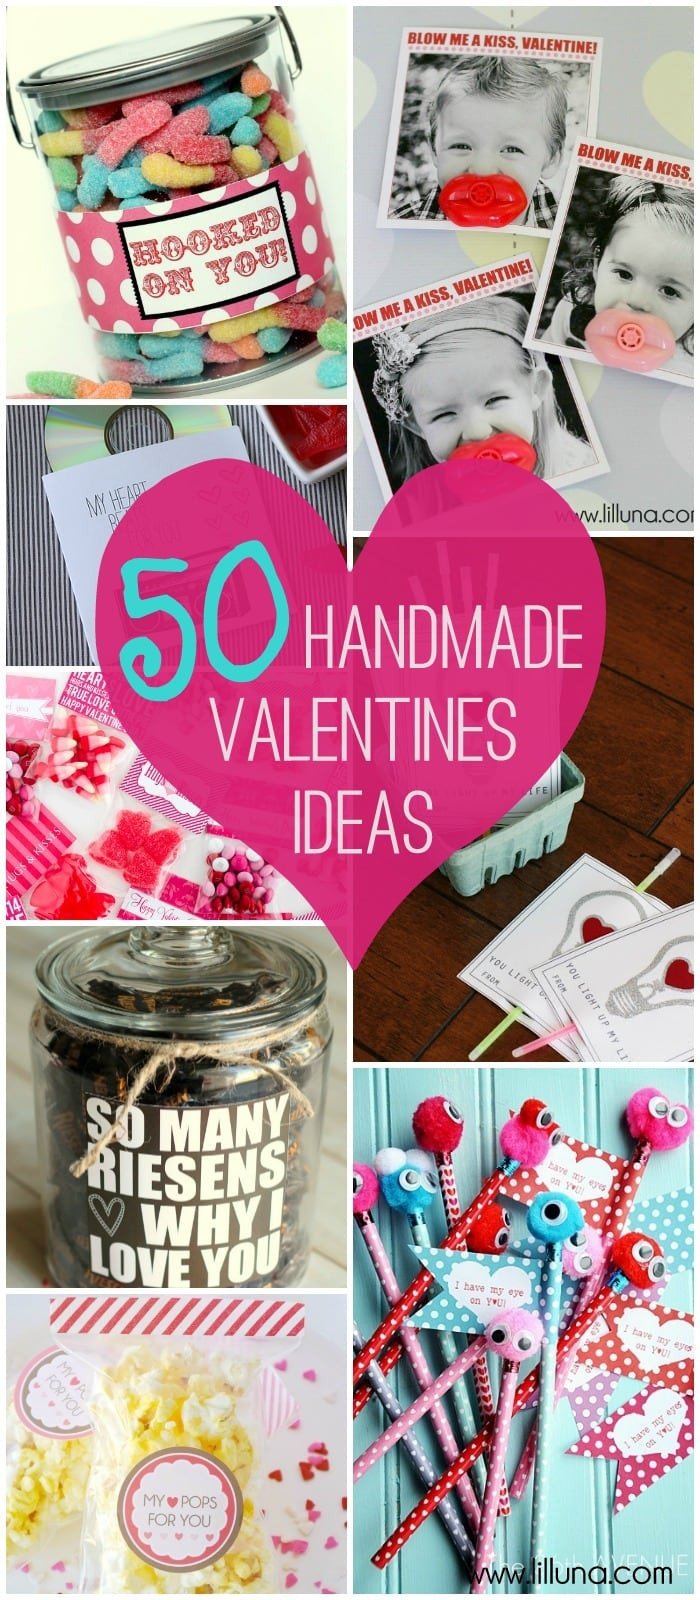 Valentines Ideas Gift
 14 Gifts of Valentines with Free Printables plus MORE